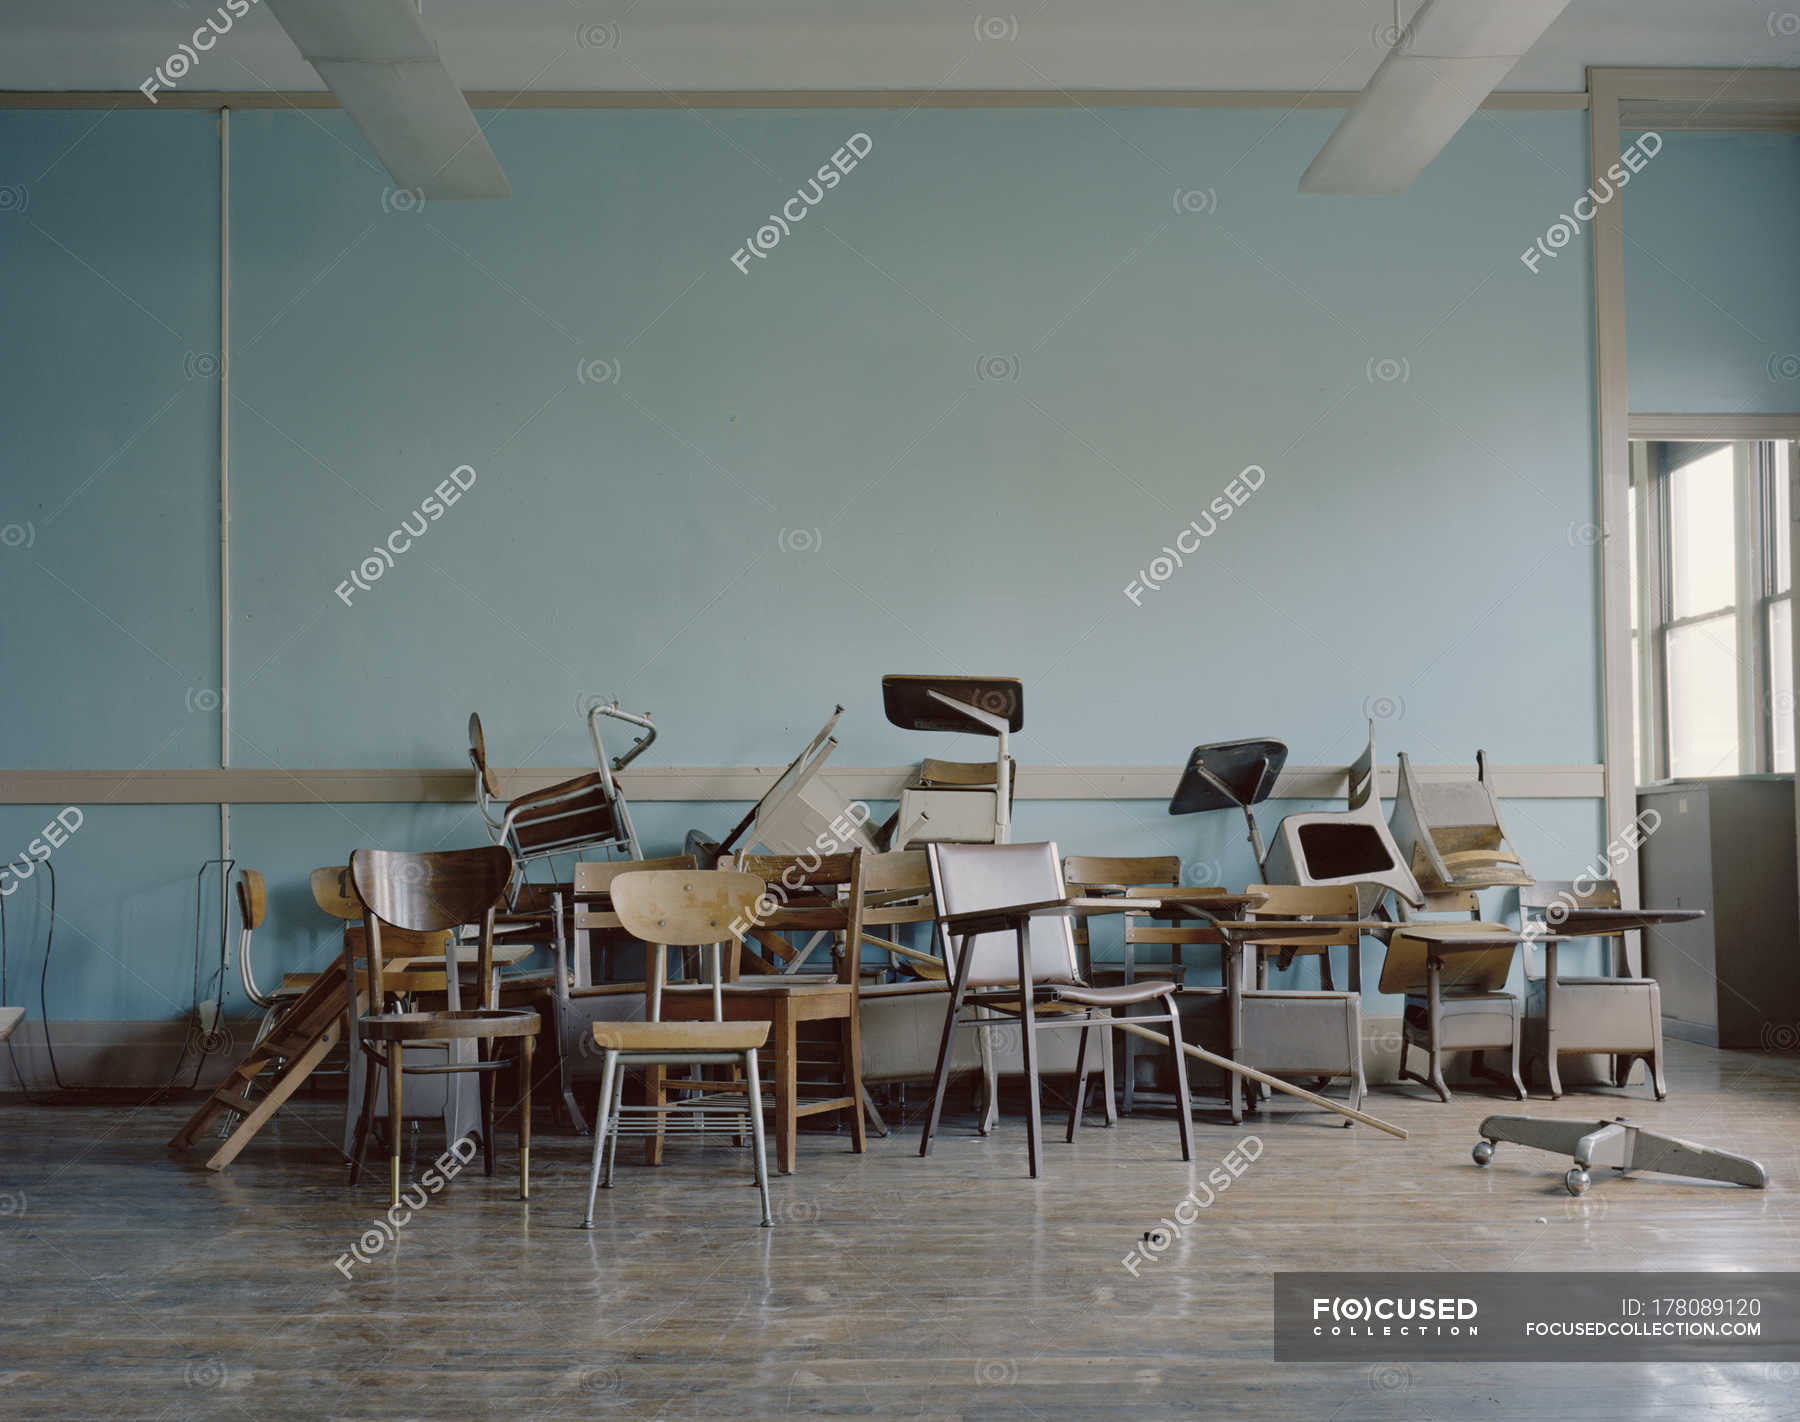 Pile Of Broken Chairs In Abandoned School Still Life Large